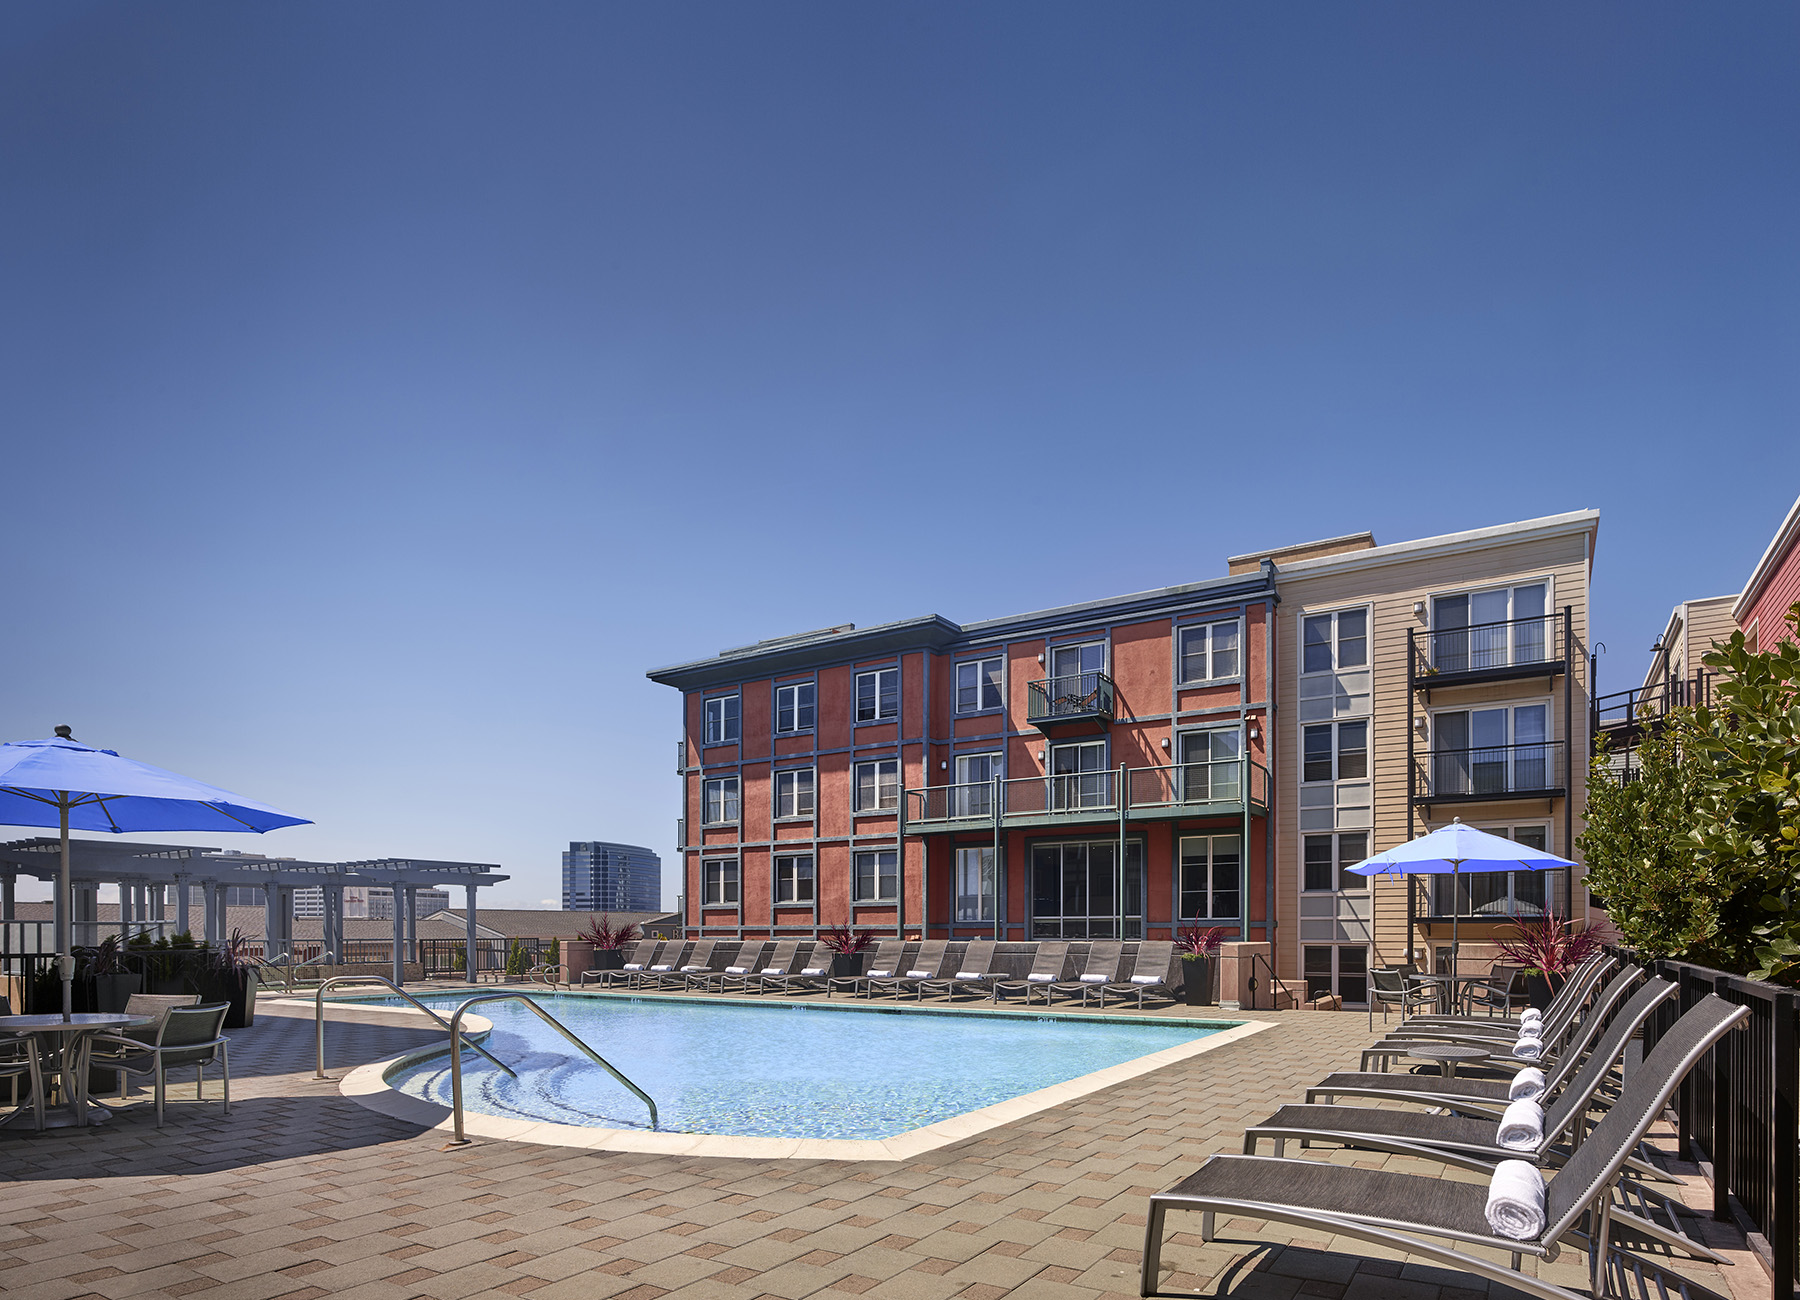 Large AVE Emeryville apartment courtyard with an in-ground pool and lounge chairs with blue umbrellas surrounding